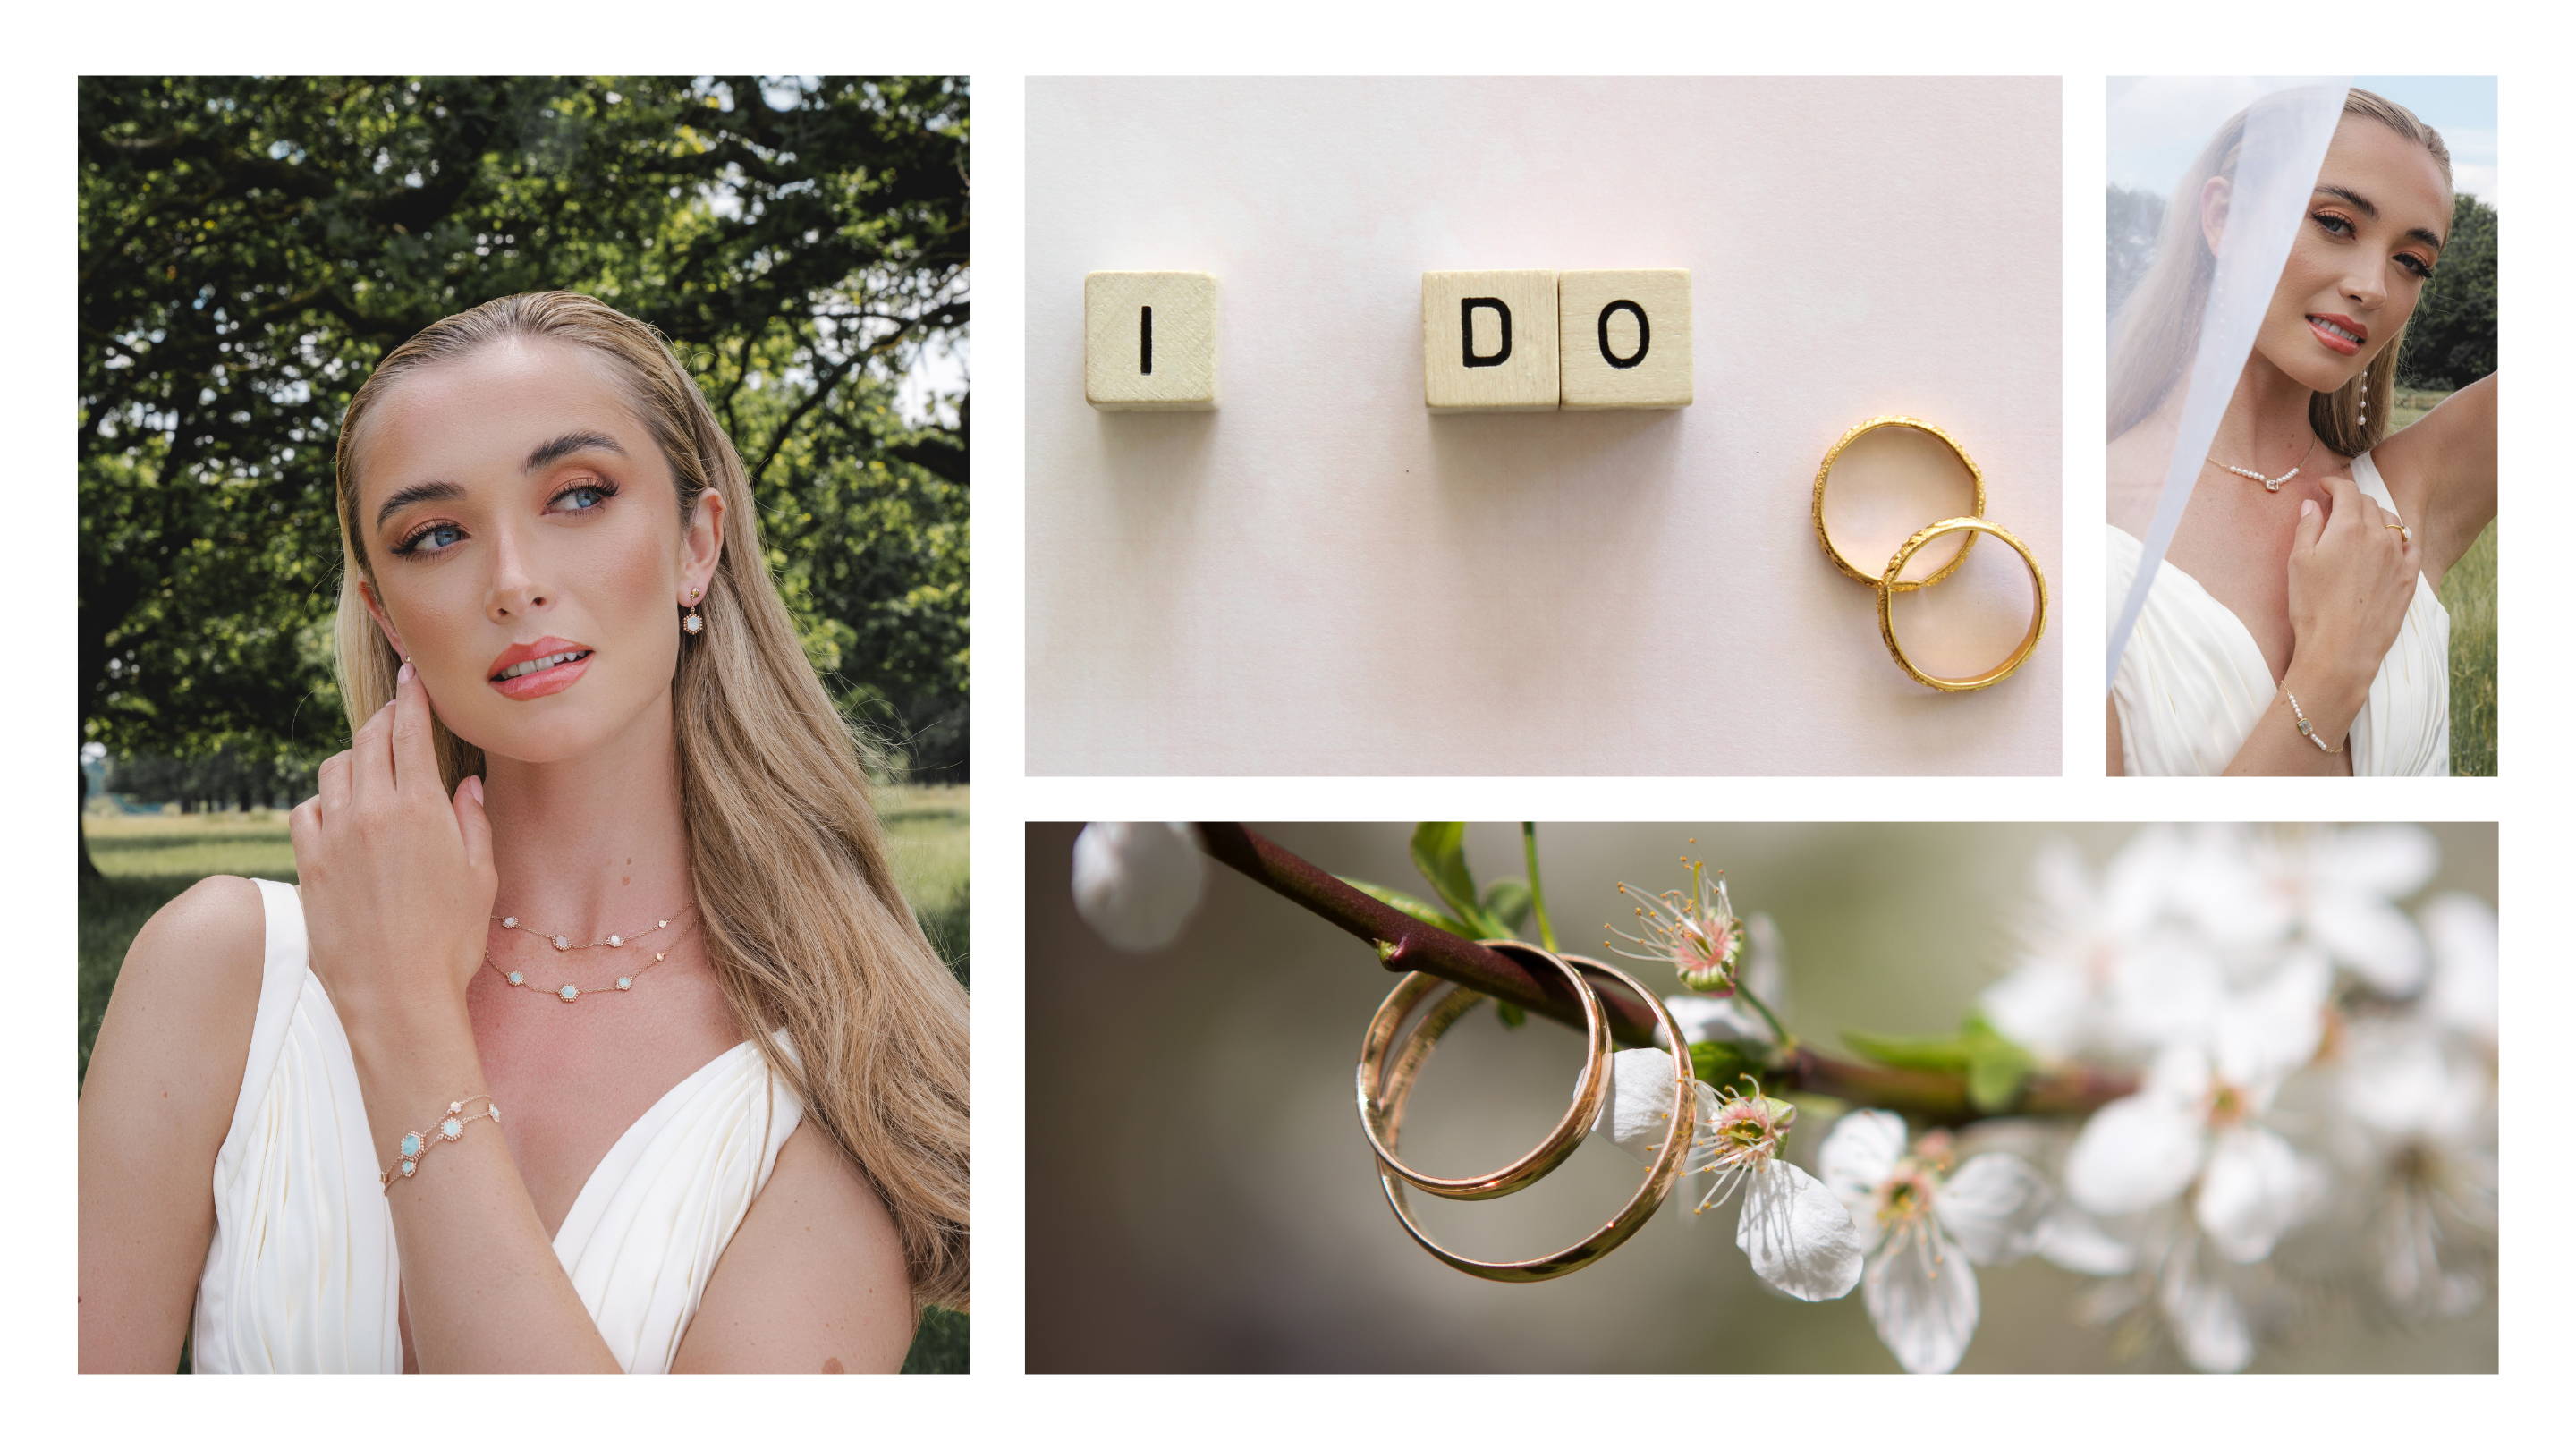 JEWELLERY FOR YOUR WEDDING DAY